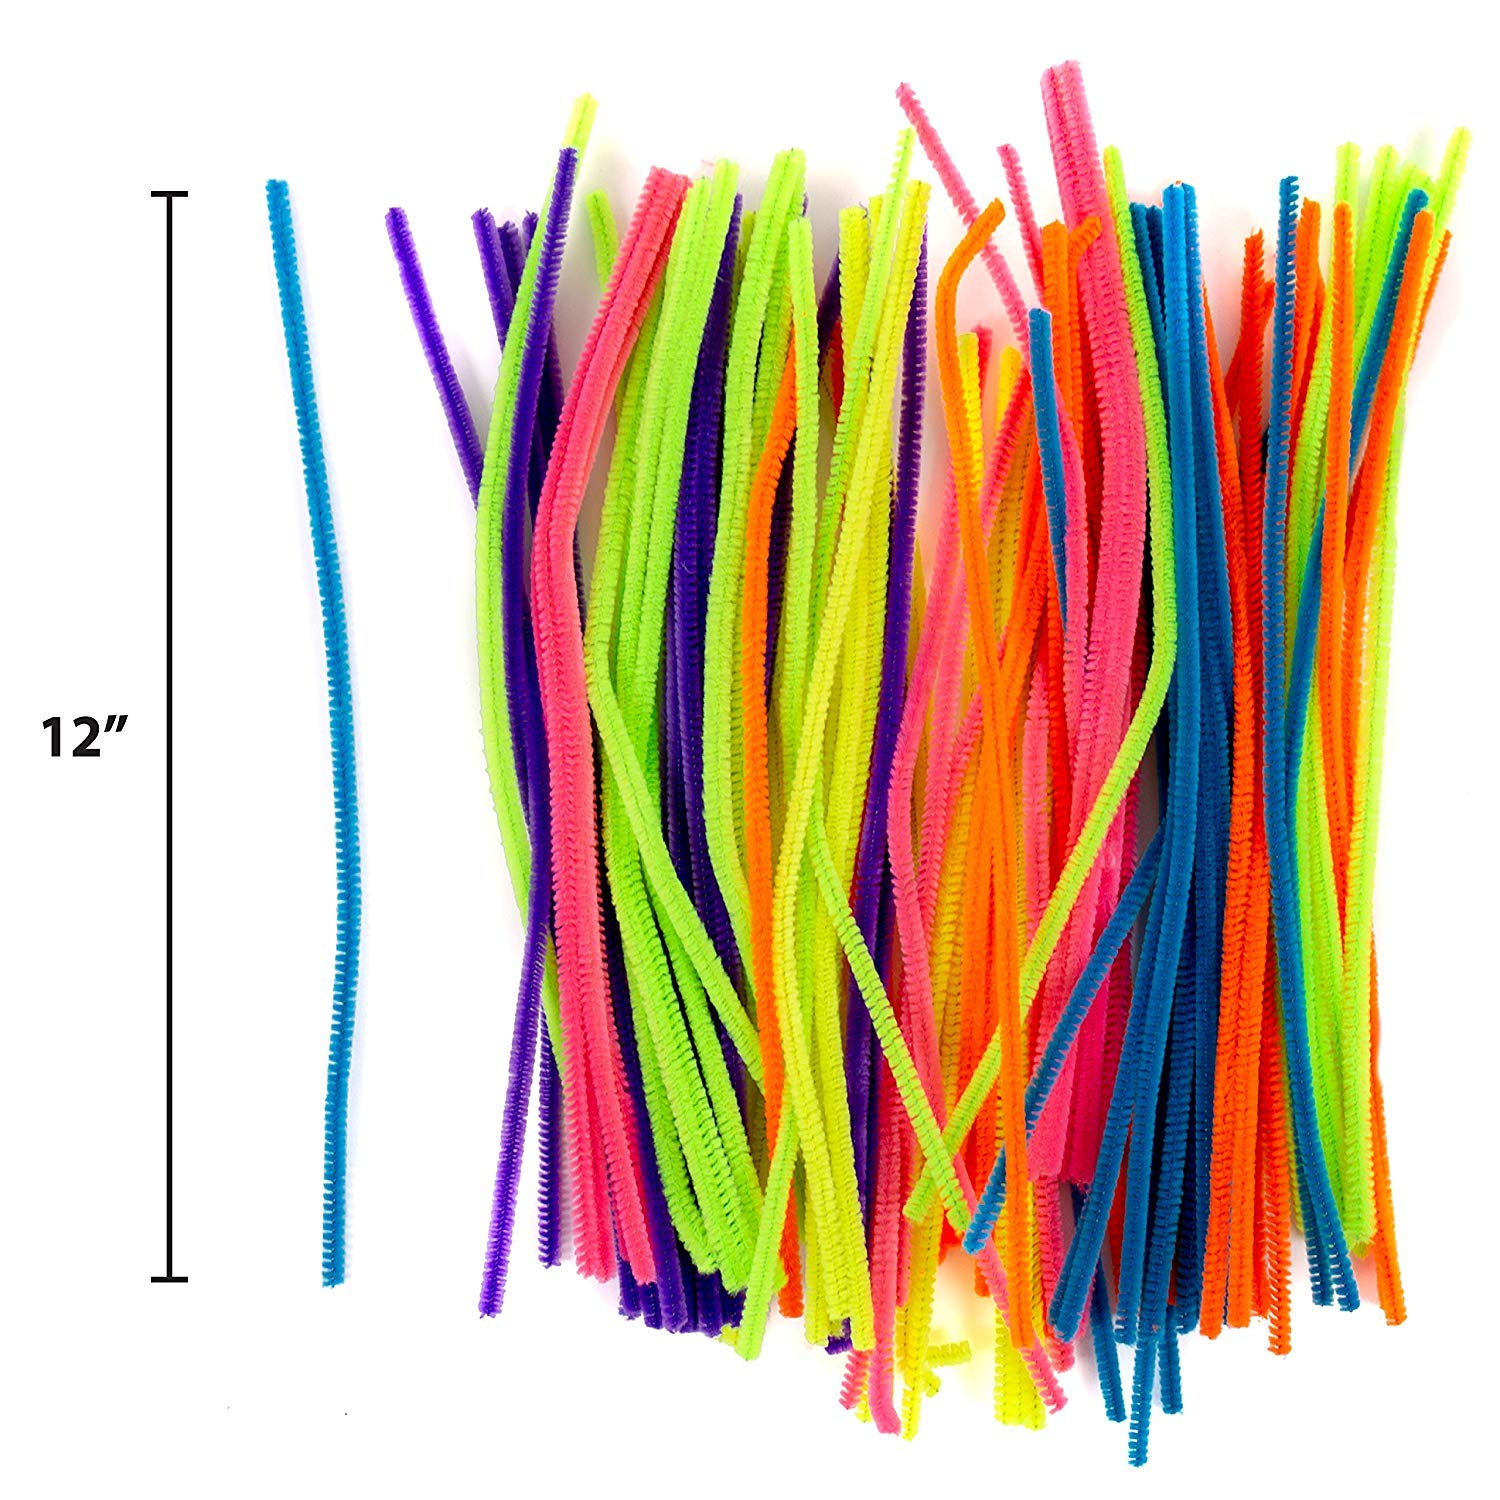 Horizon Group USA 200 Neon Fuzzy Sticks, Value Pack of Pipe Cleaners in 6 Colors, 12 Inches, Chenille Stems, Bendy Sticks, Great for DIY Arts & Crafts Projects, Classrooms & Craft Rooms